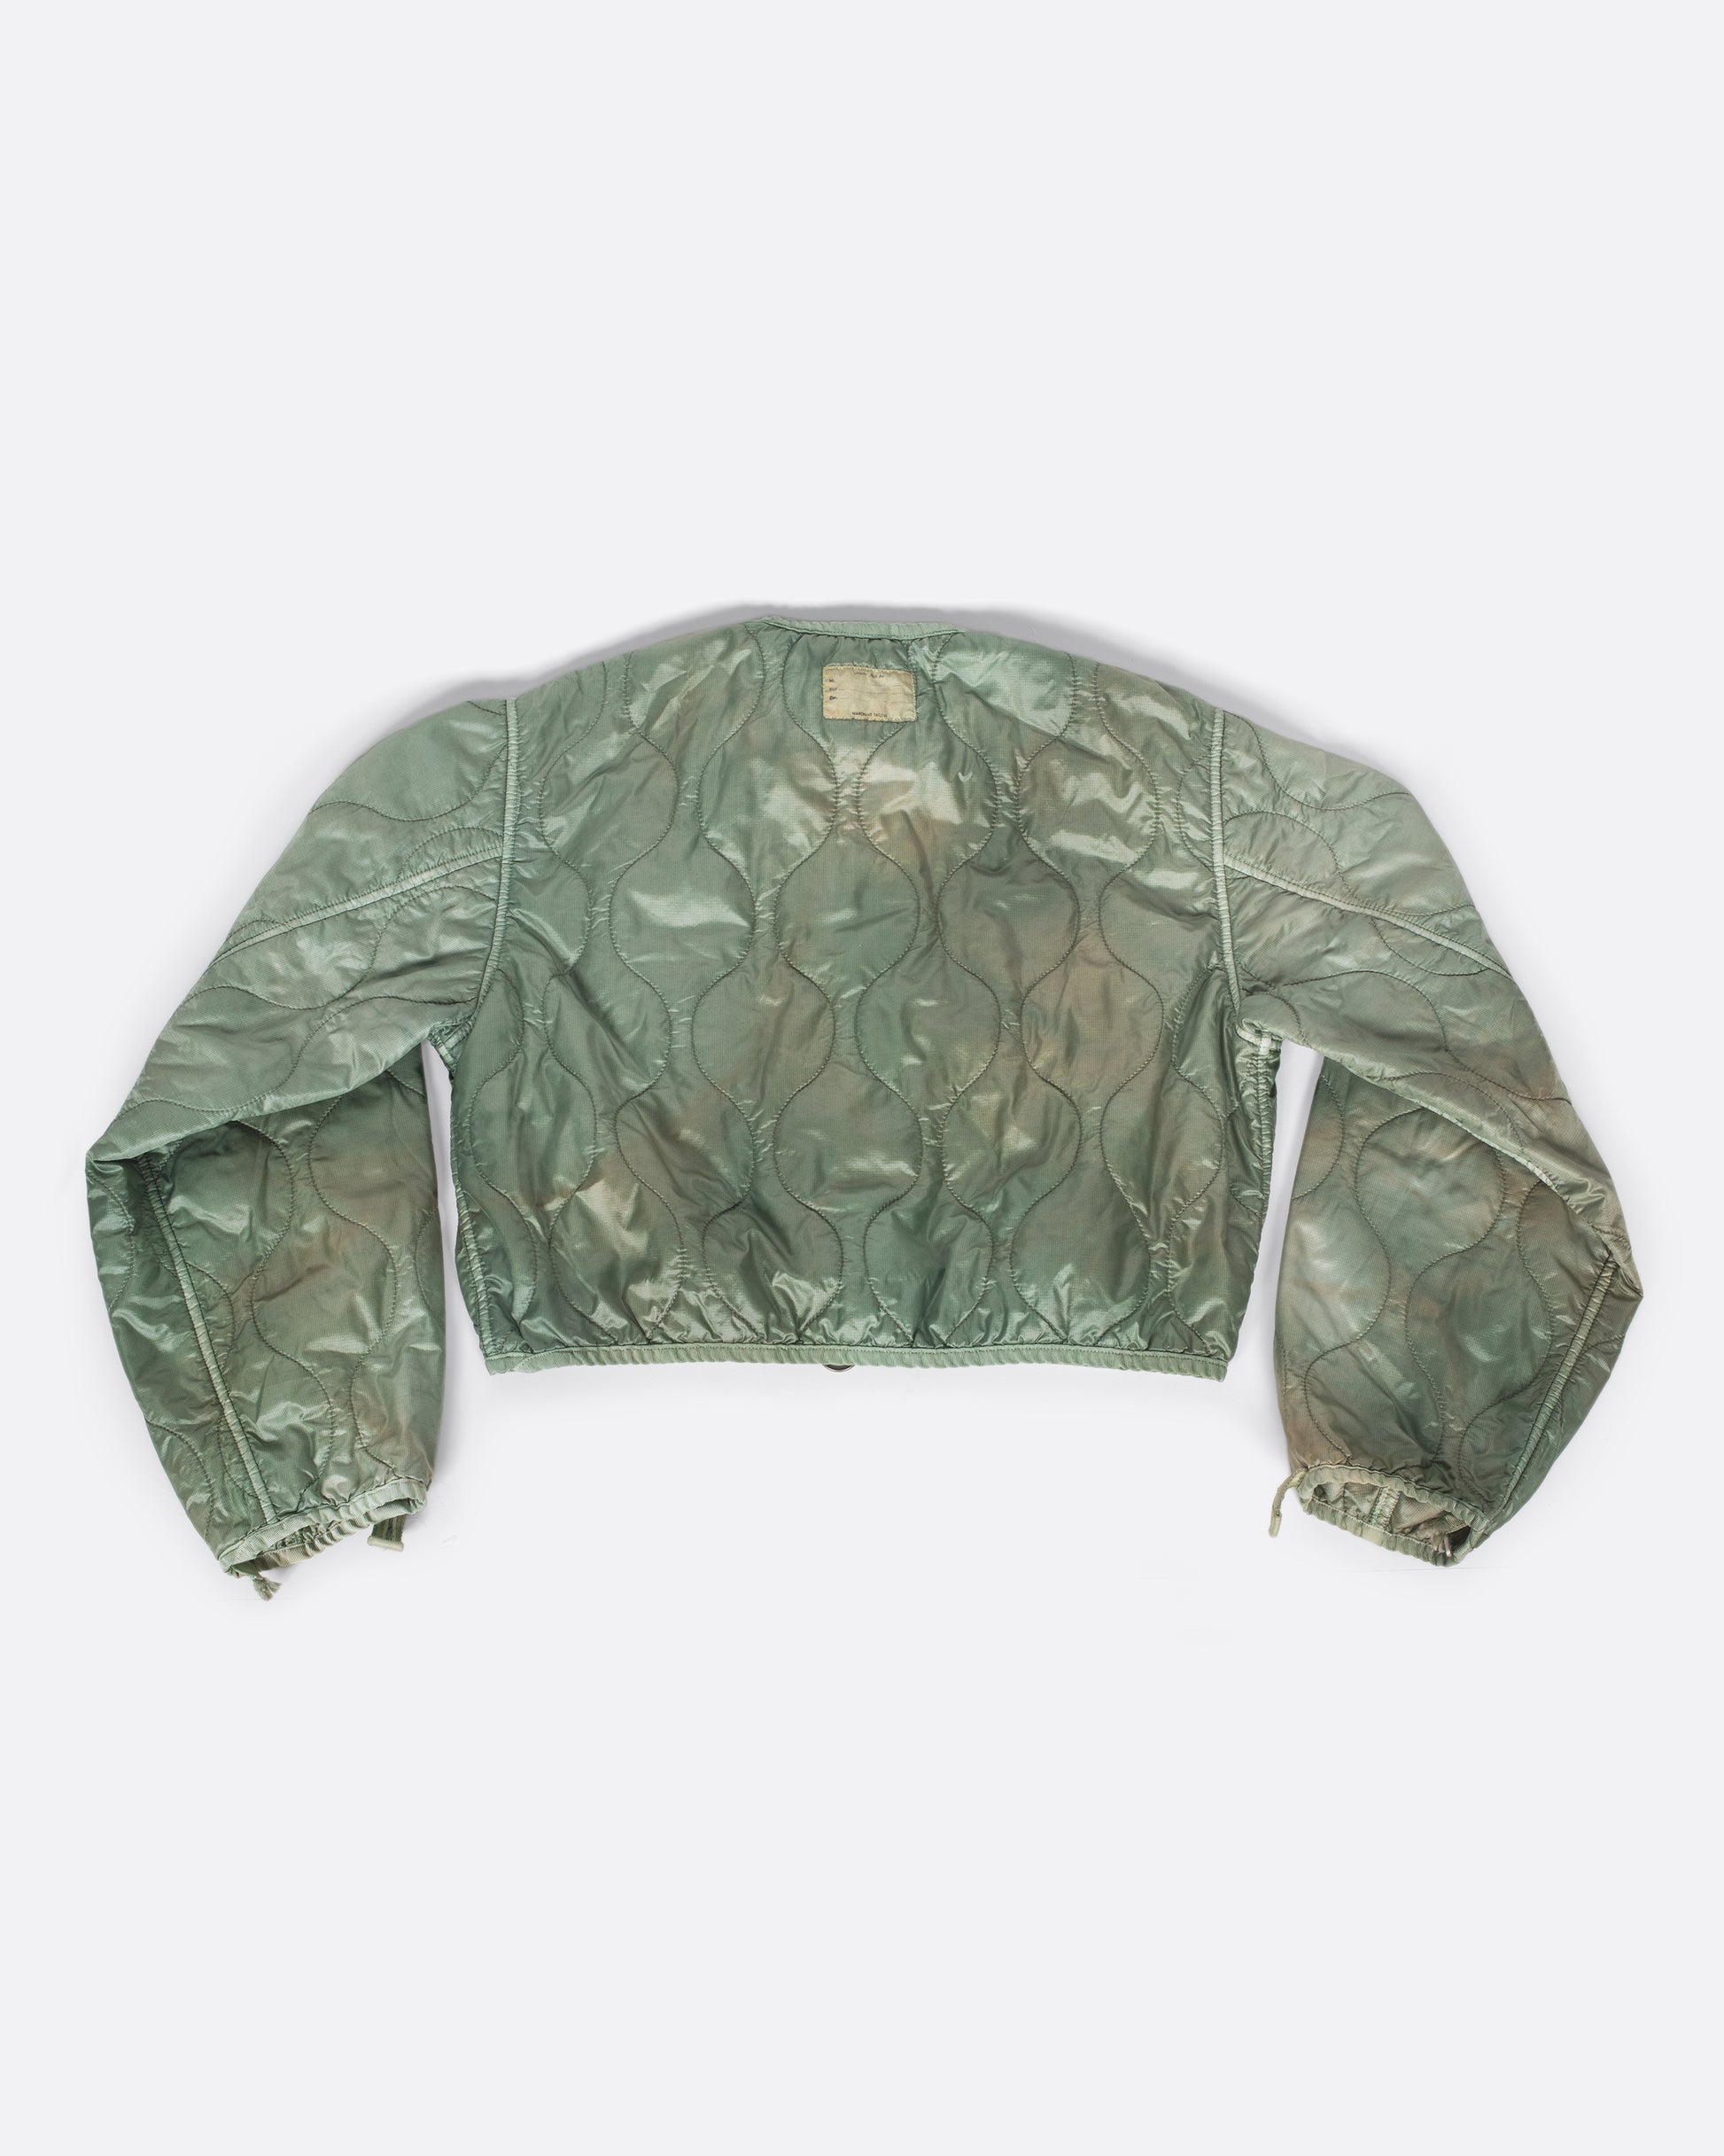 A nylon, quilted, dip-dyed bolero jacket in a muted sage green - great for layering!